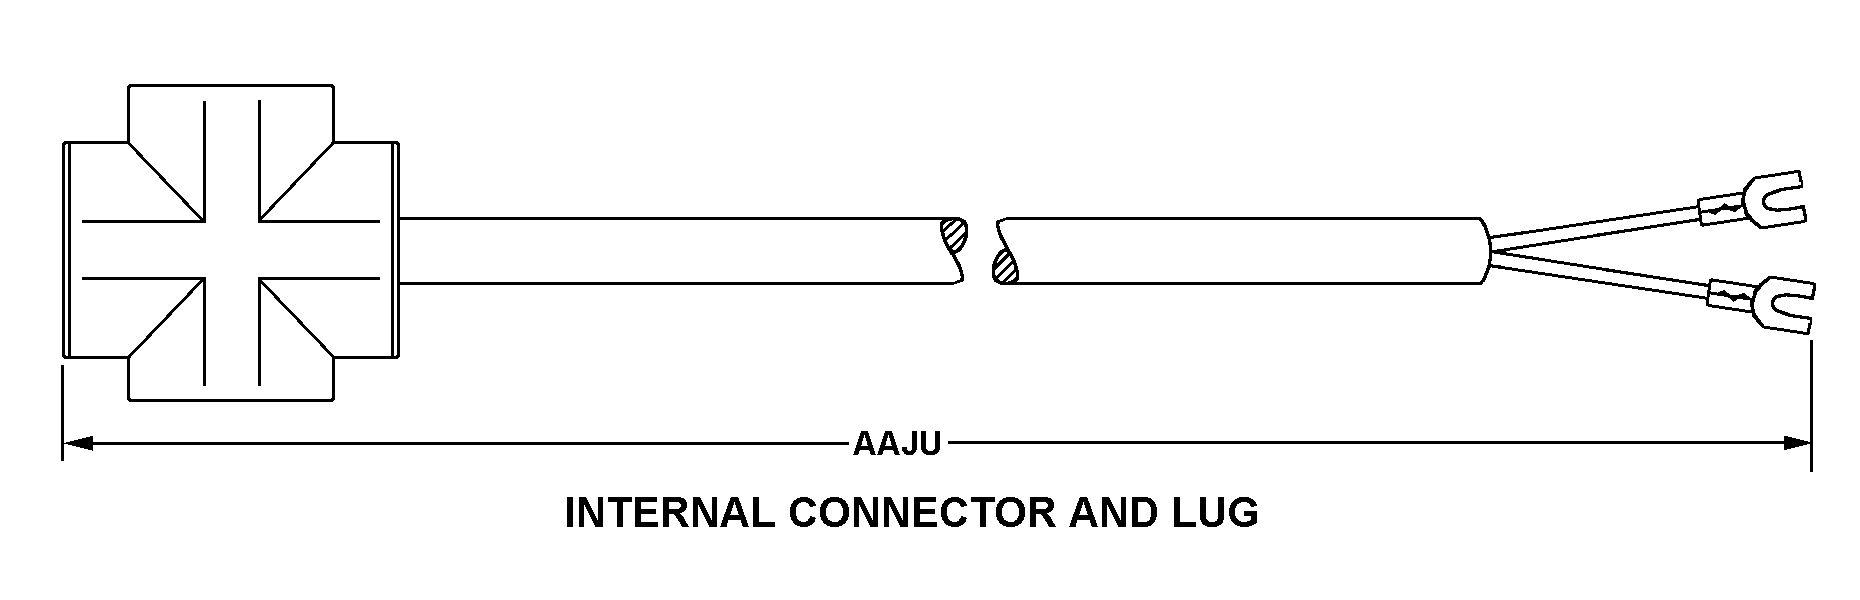 INTERNAL CONNECTOR AND LUG style nsn 6150-00-368-4631